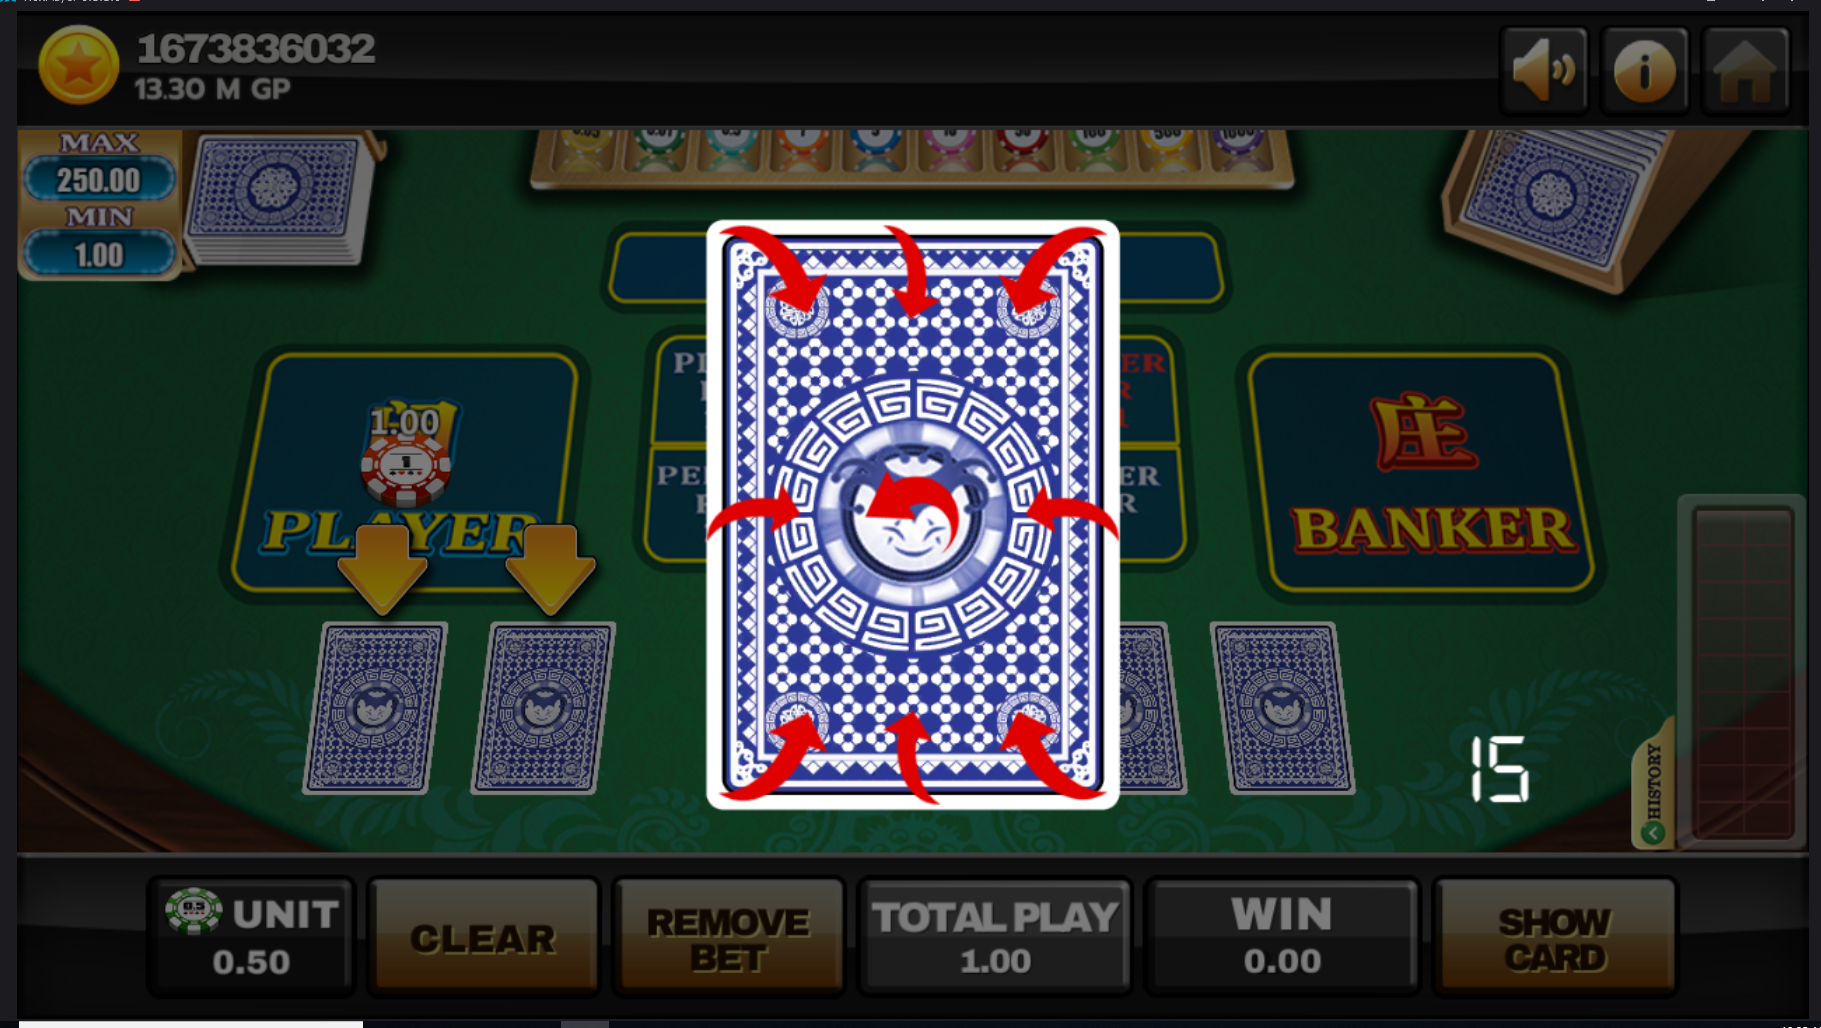 BACCARAT_4.png - 1.99 MB